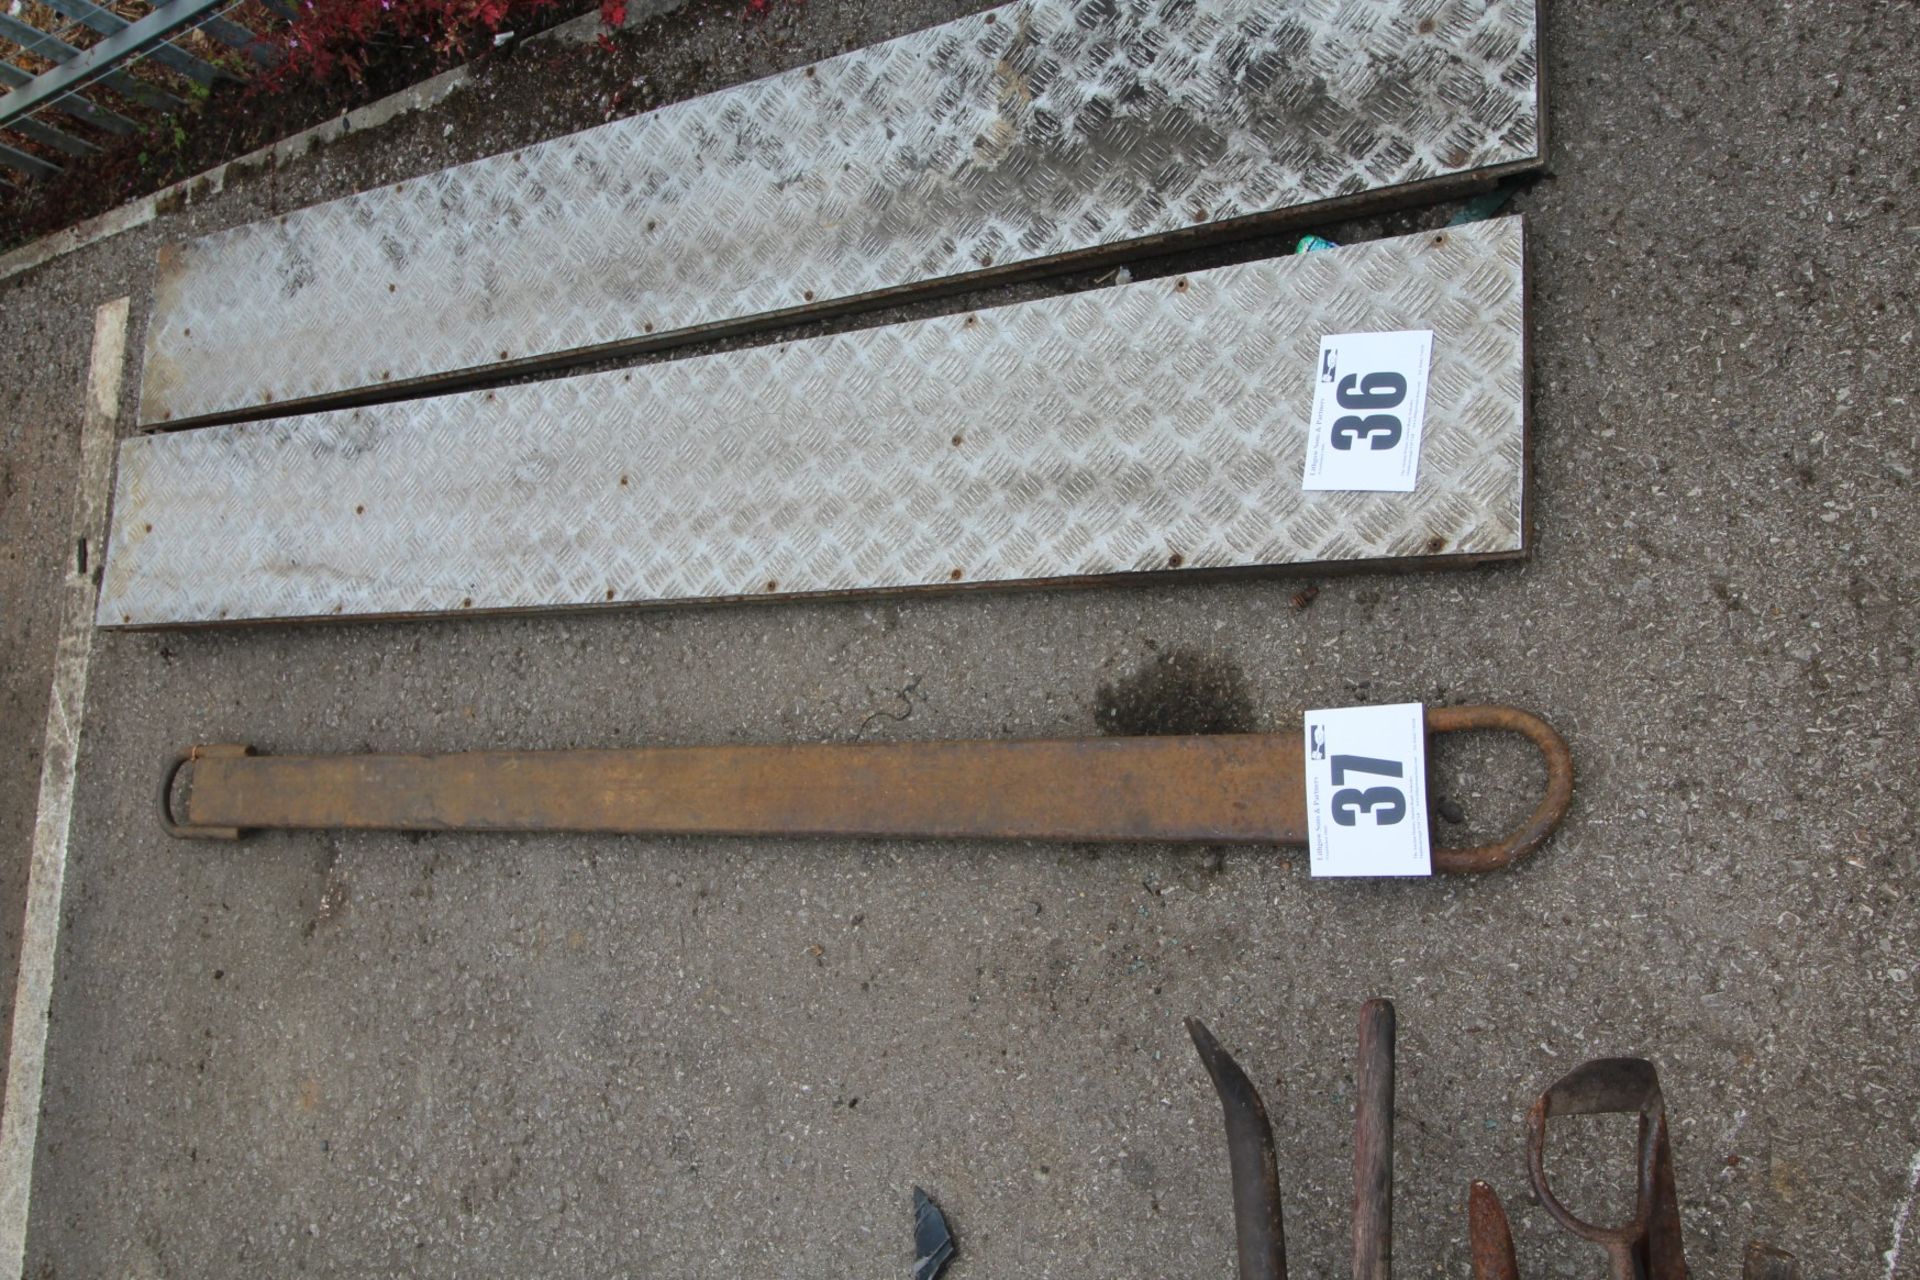 STEEL FABRICATED TOWING HITCH, MEASURING APPROXIMATELY 77INCHES